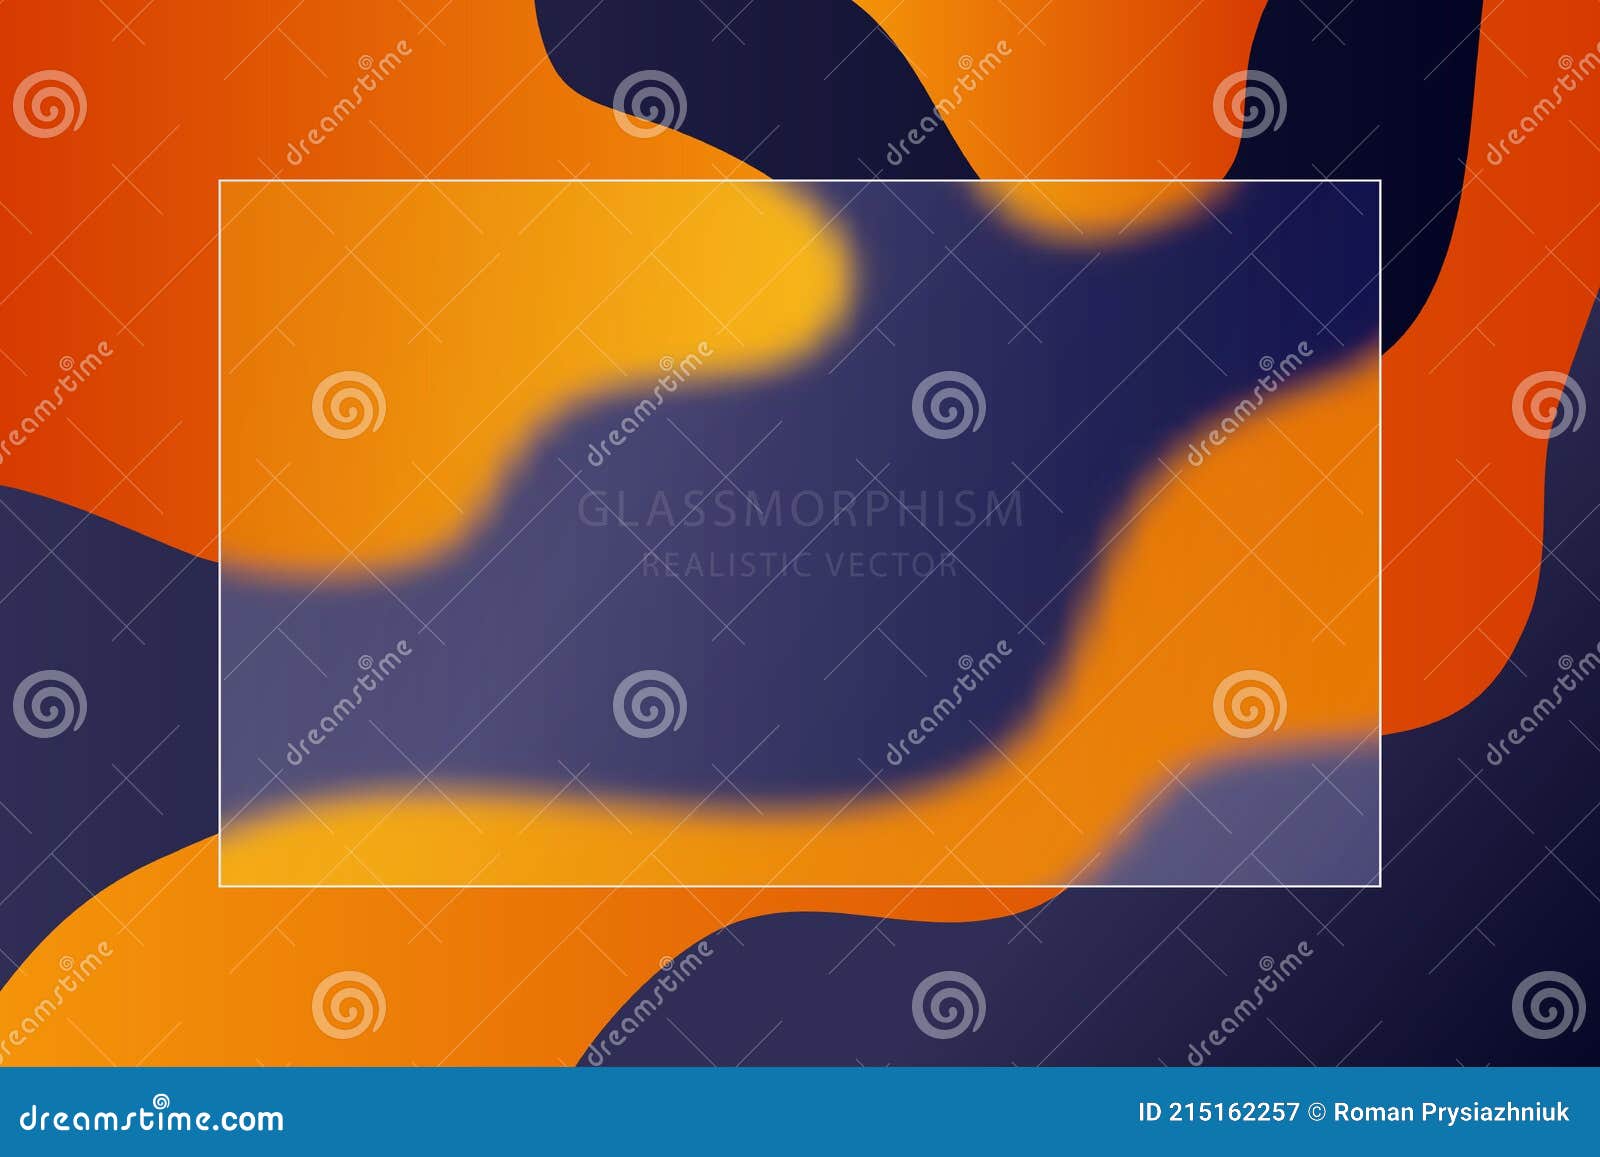 glassmorphism effect with transparent glass plate on ..abstract color background. frosted acrylic or matte plexiglass plates